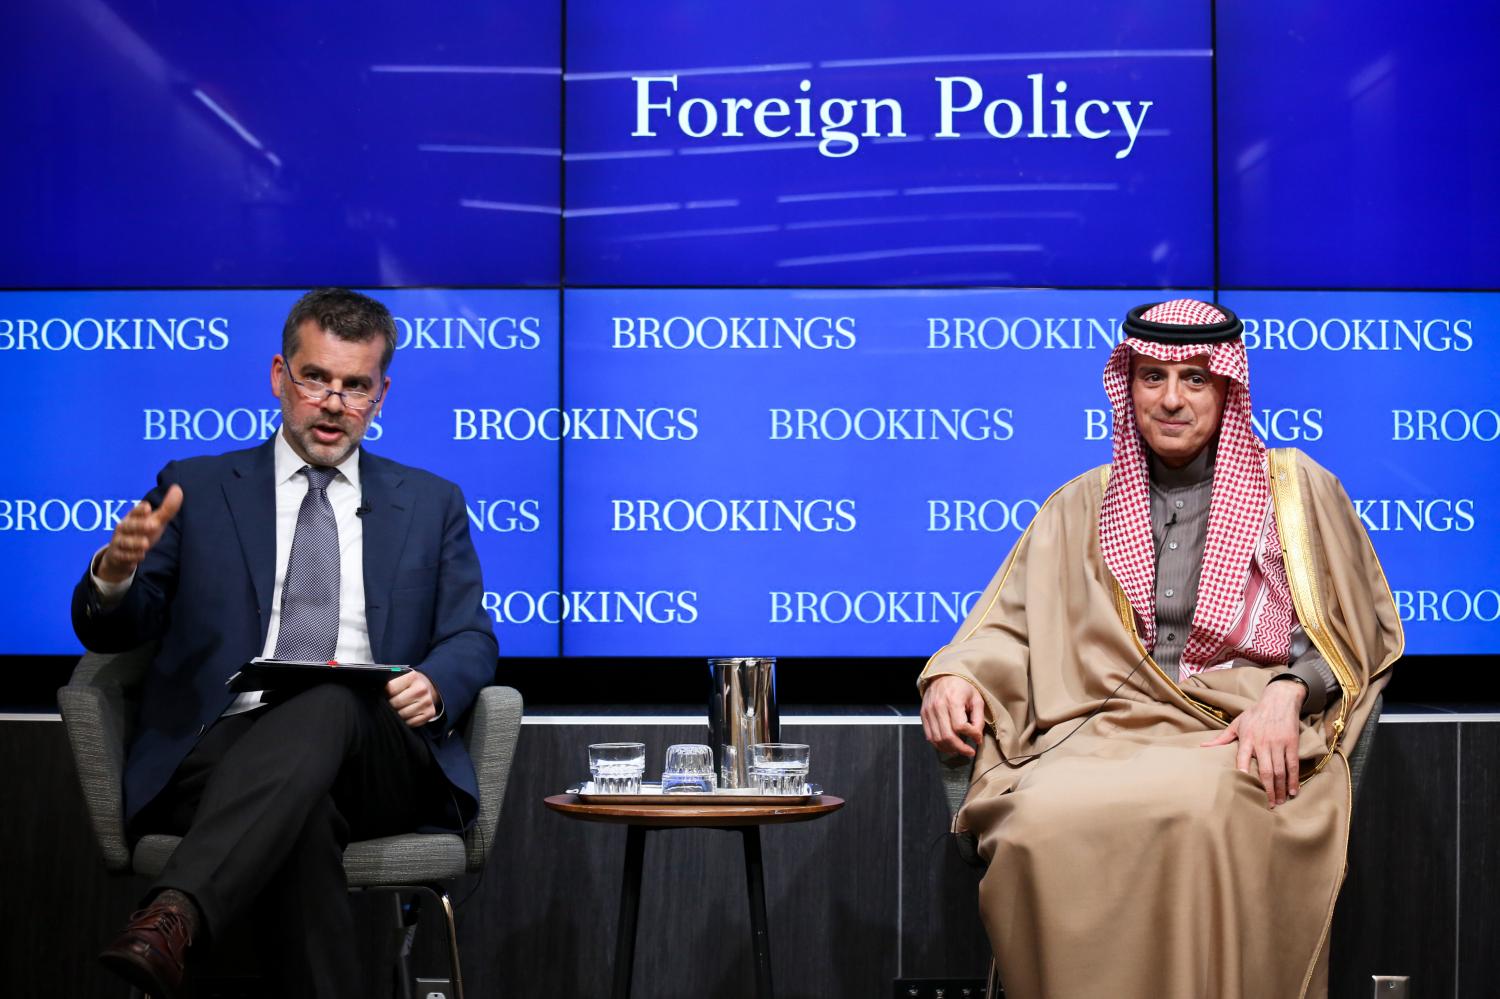 Washington, DC-2018-On March 22, Foreign Policy at Brookings will host the minister of foreign affairs of the Kingdom of Saudi Arabia, H.E. Adel Al-Jubeir, for an Alan and Jane Batkin International Leaders Forum. In his remarks, the foreign minister will provide perspectives on Saudi Arabias role as a regional leader for stability and reconstruction. He will also discuss the importance of maintaining key bilateral relationships to promote the restoration of security and stability in the Middle East.